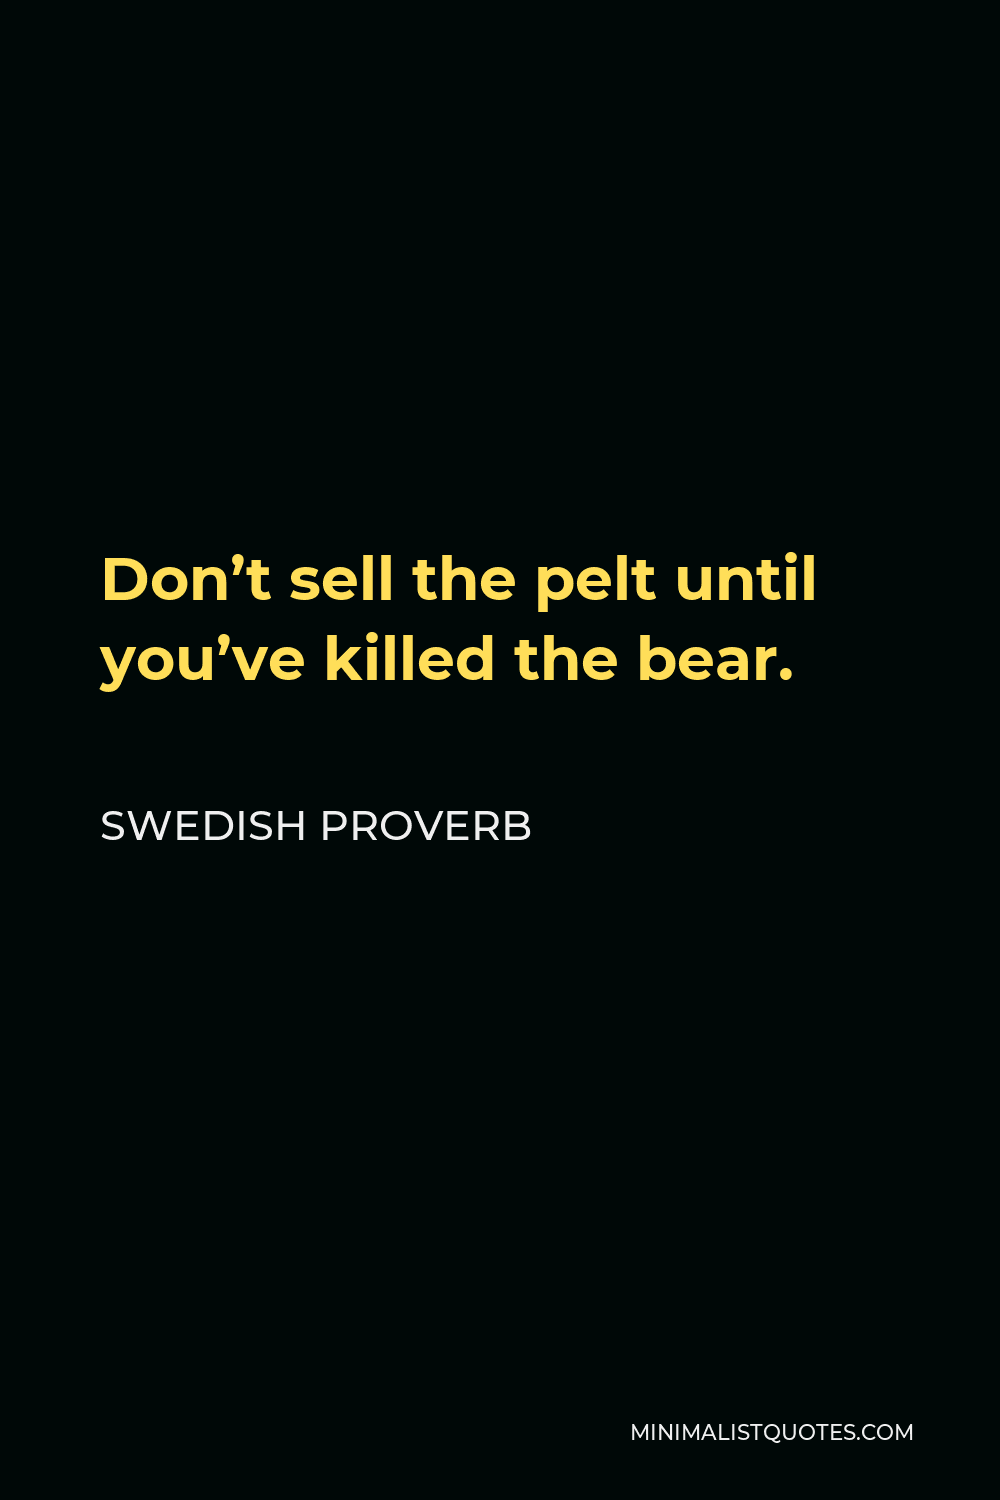 Swedish Proverb Quote - Don’t sell the pelt until you’ve killed the bear.